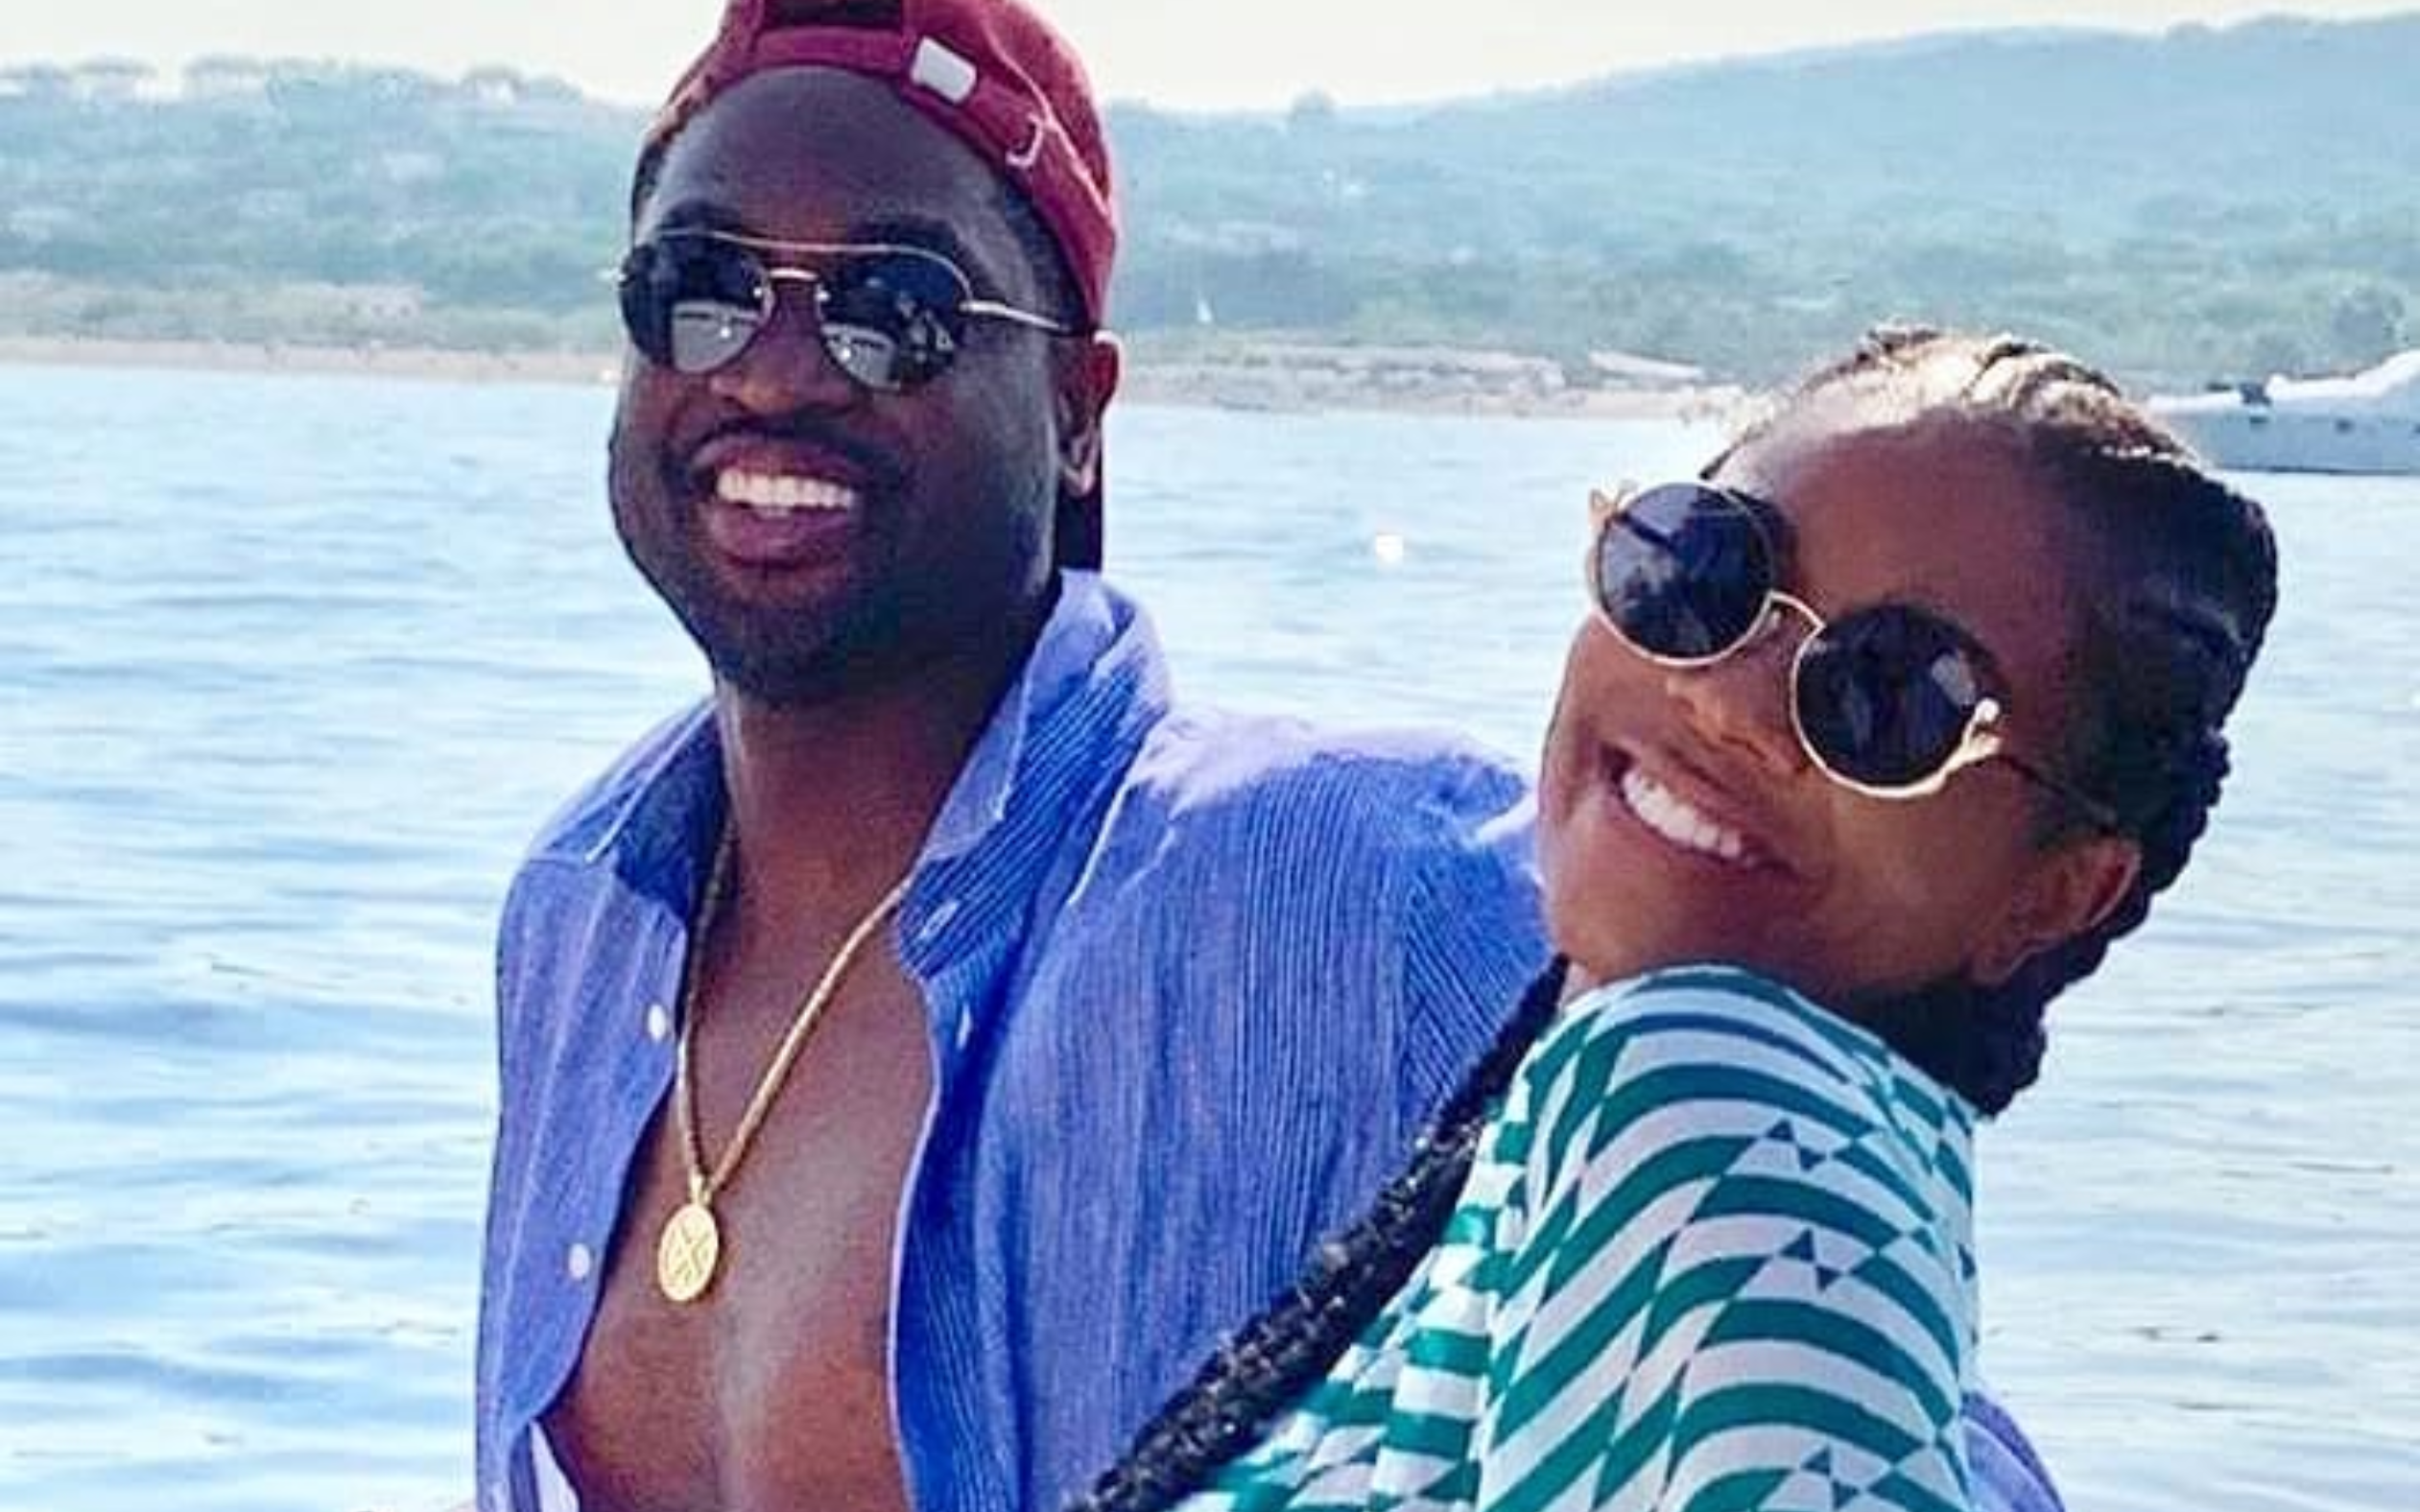 Dwyane Wade And Gabrielle Union Gave Us 100% Black Love Goals On Their Anniversary Trip